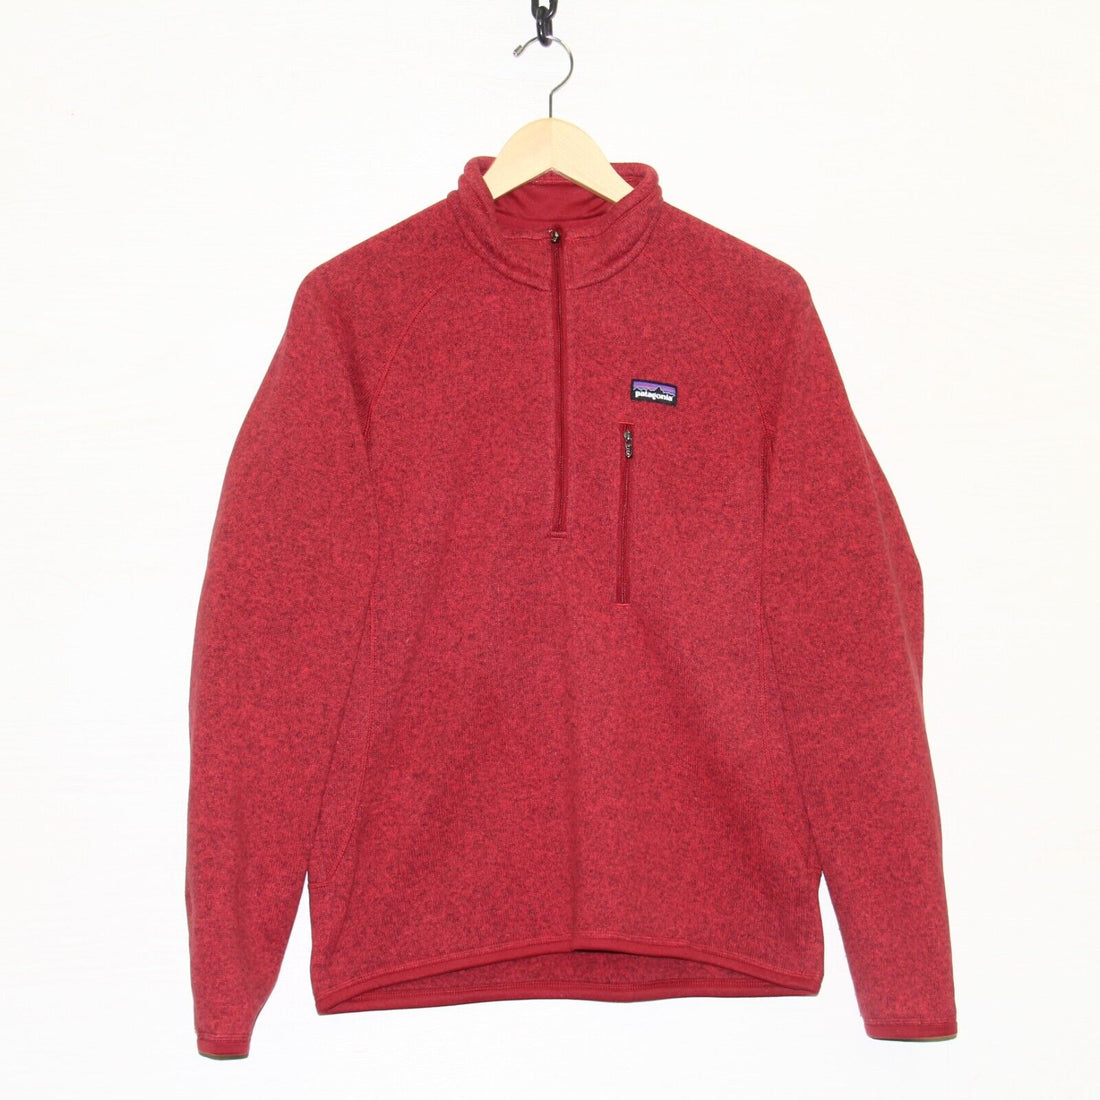 Patagonia Quarter Zip Better Sweater Size Small Red Pullover